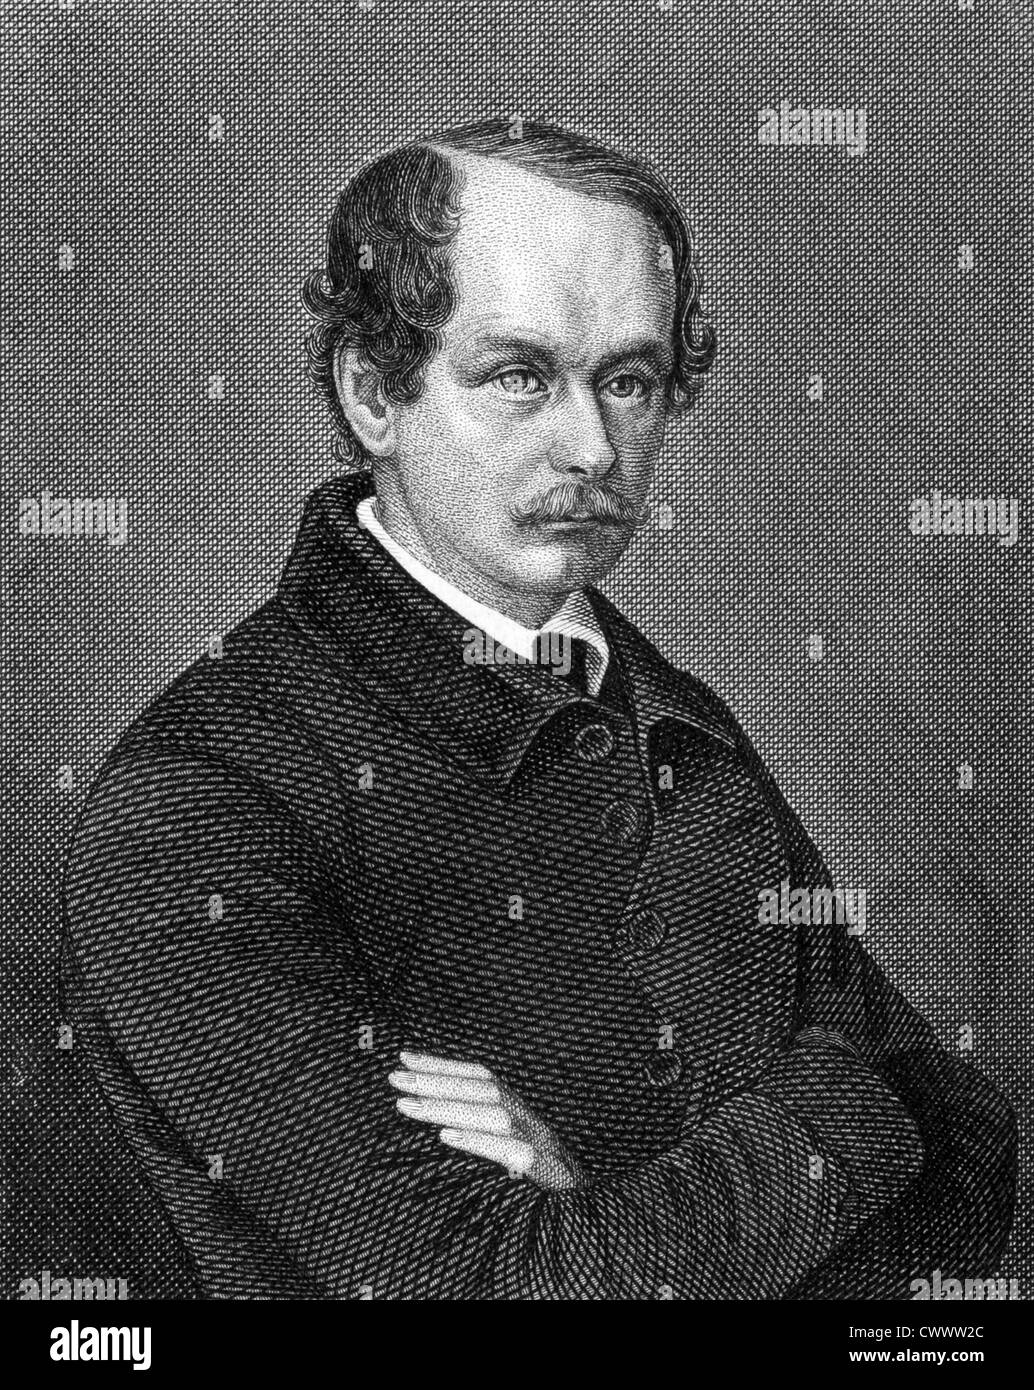 Matthias Jakob Schleiden (1804-1881) on engraving from 1859. German botanist and co-founder of the cell theory. Stock Photo